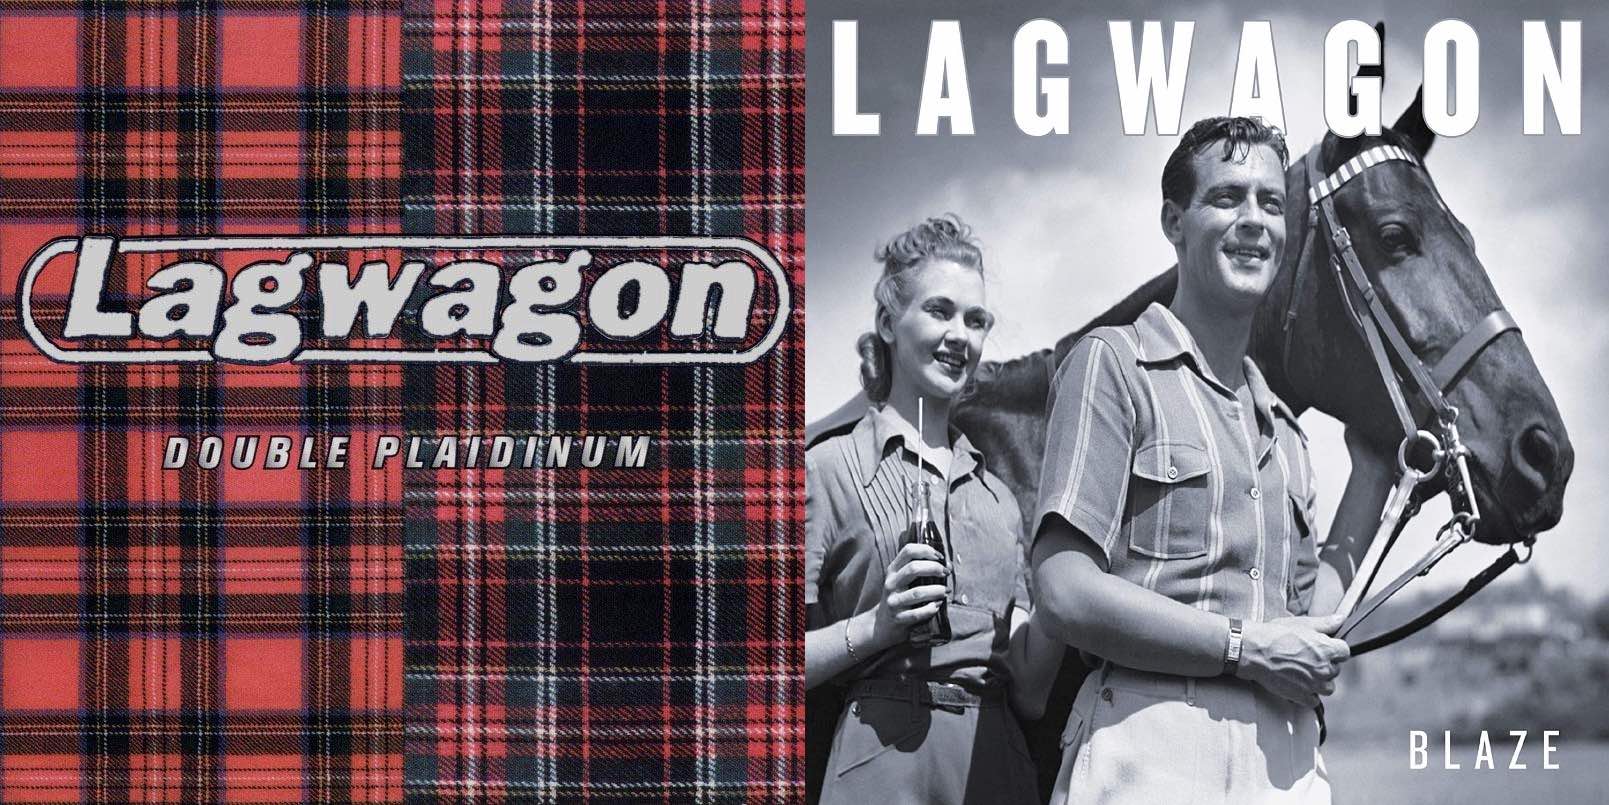 Lagwagon performing Double Plaidinum and Blaze in full on 2021 